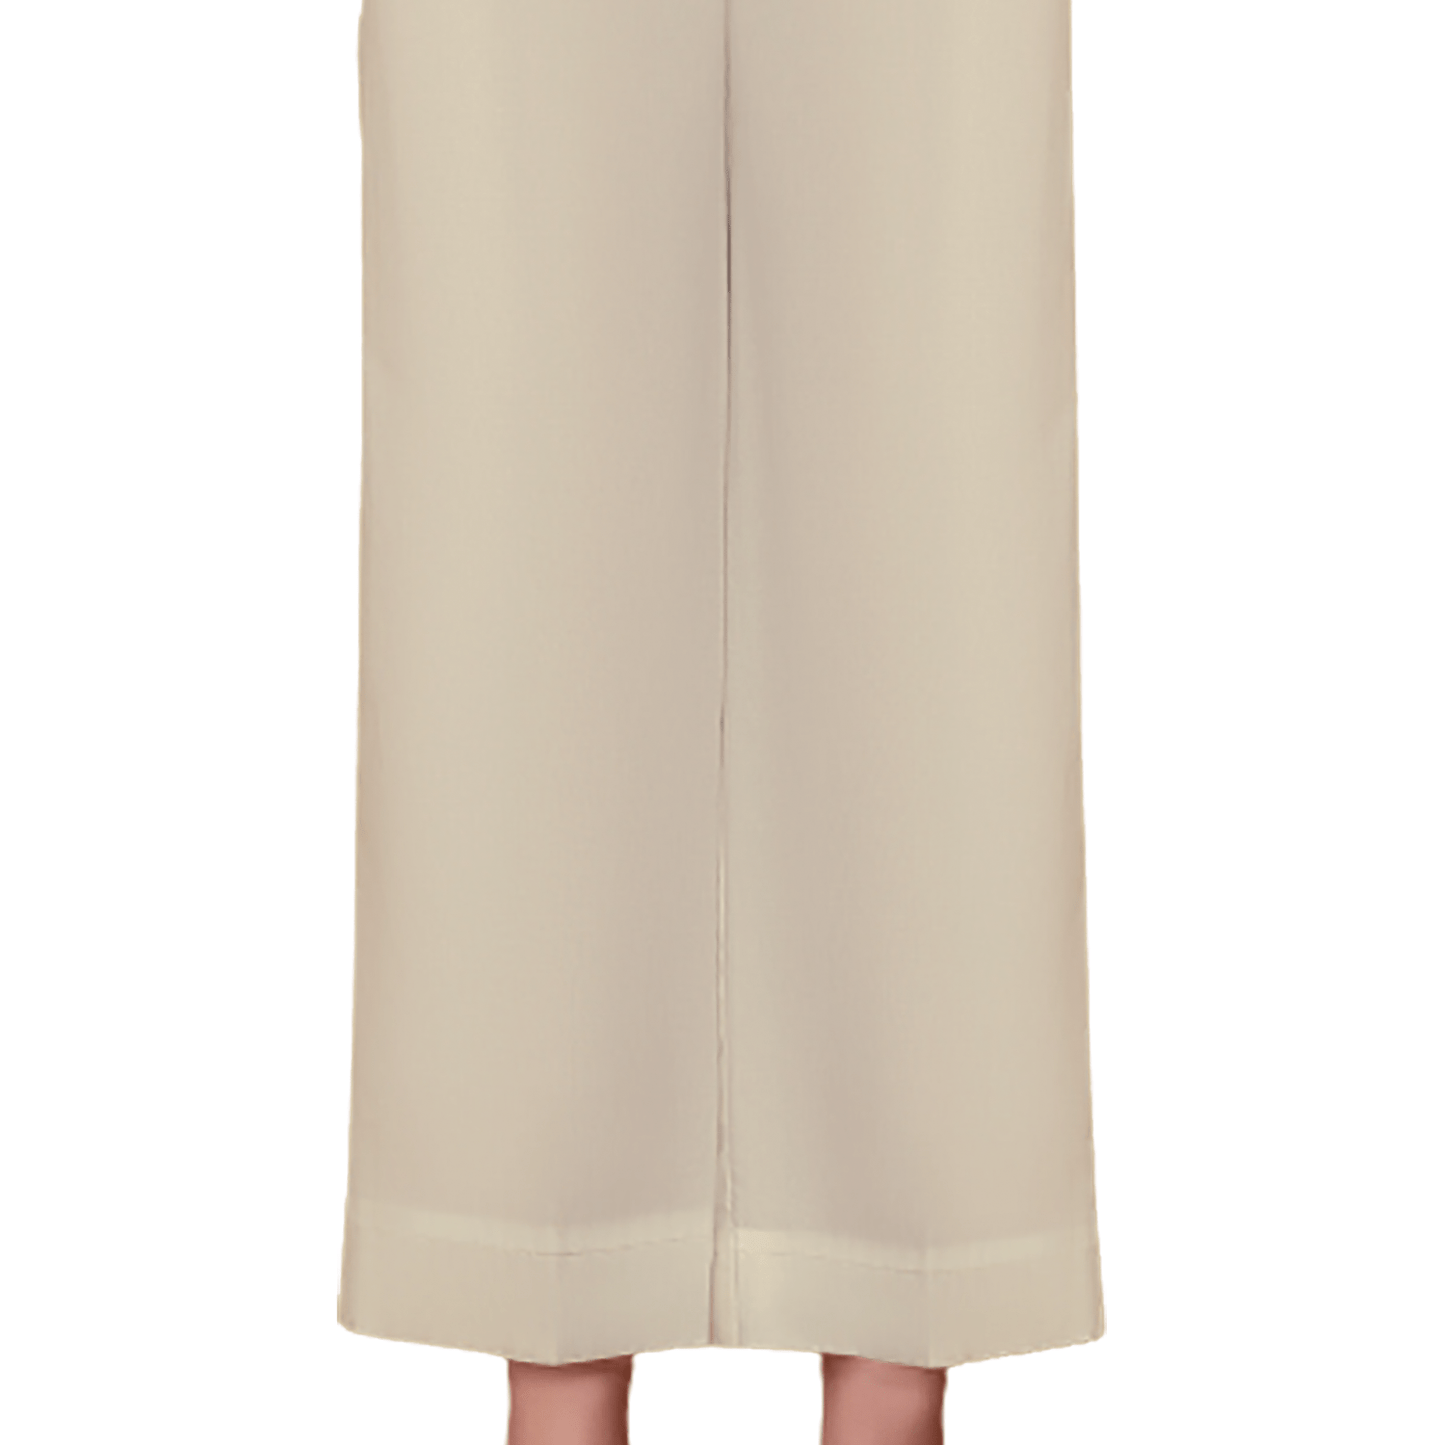 Culottes / Palazzo for Women in Cotton - CCT01 - Dhanak Boutique